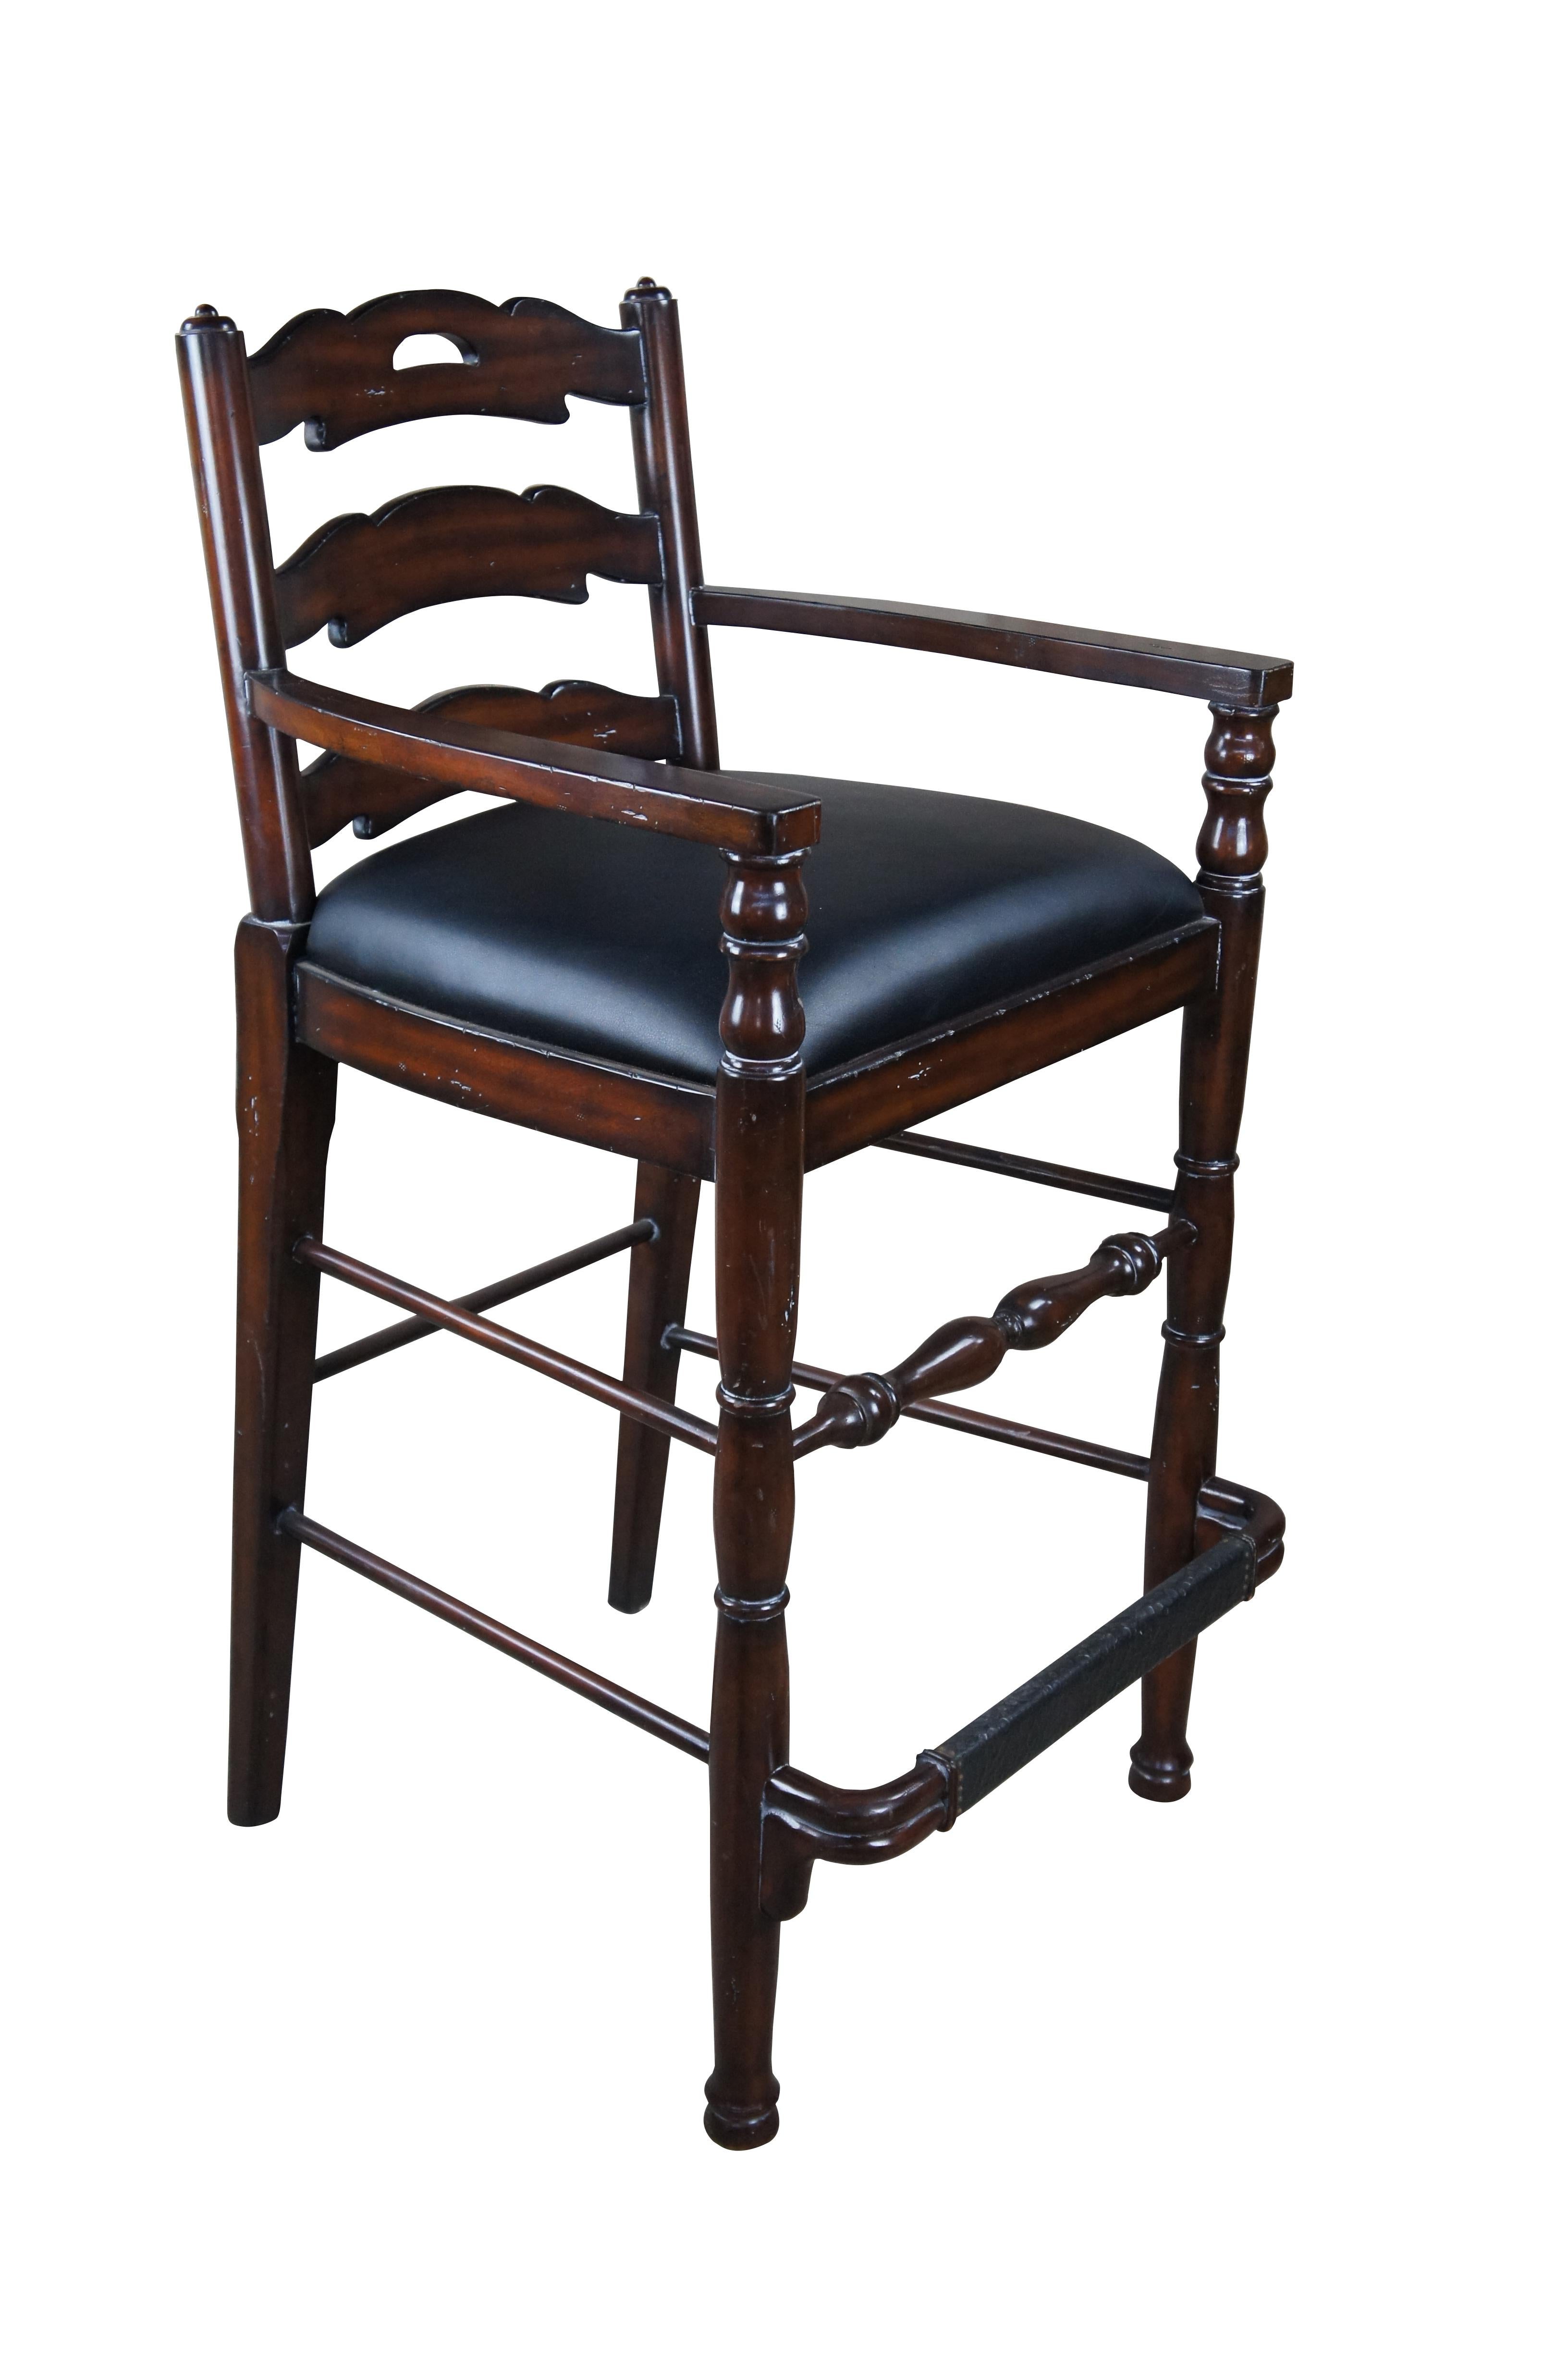 Maitland Smith Hunt Club Bar Stool, #985.  Features a mahogany frame with ladderback and black leather seat.  Includes turned legs and leather foot rest. Naturally distressed finish.

Dimensions:
23.5